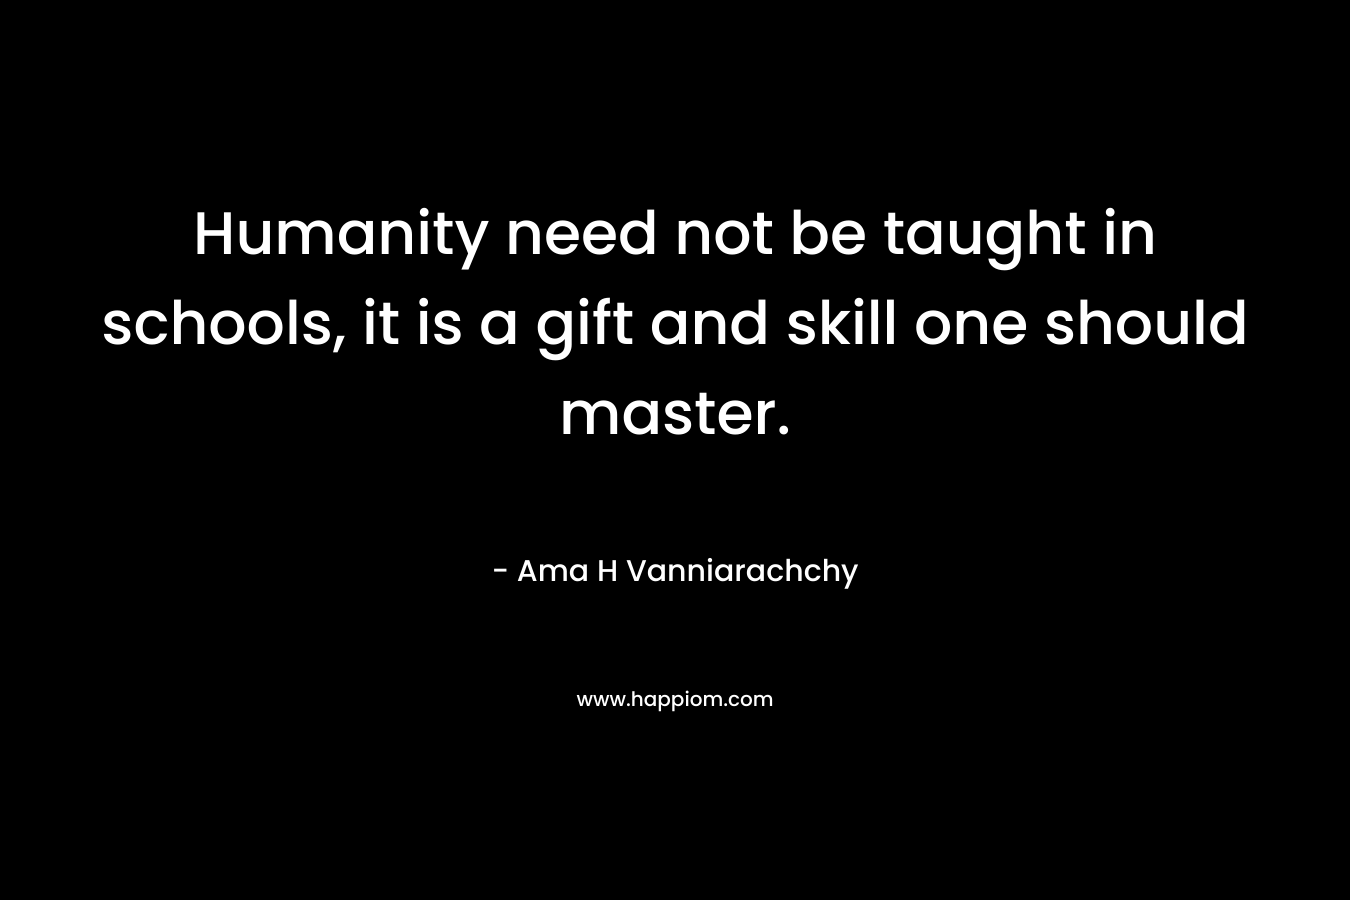 Humanity need not be taught in schools, it is a gift and skill one should master.